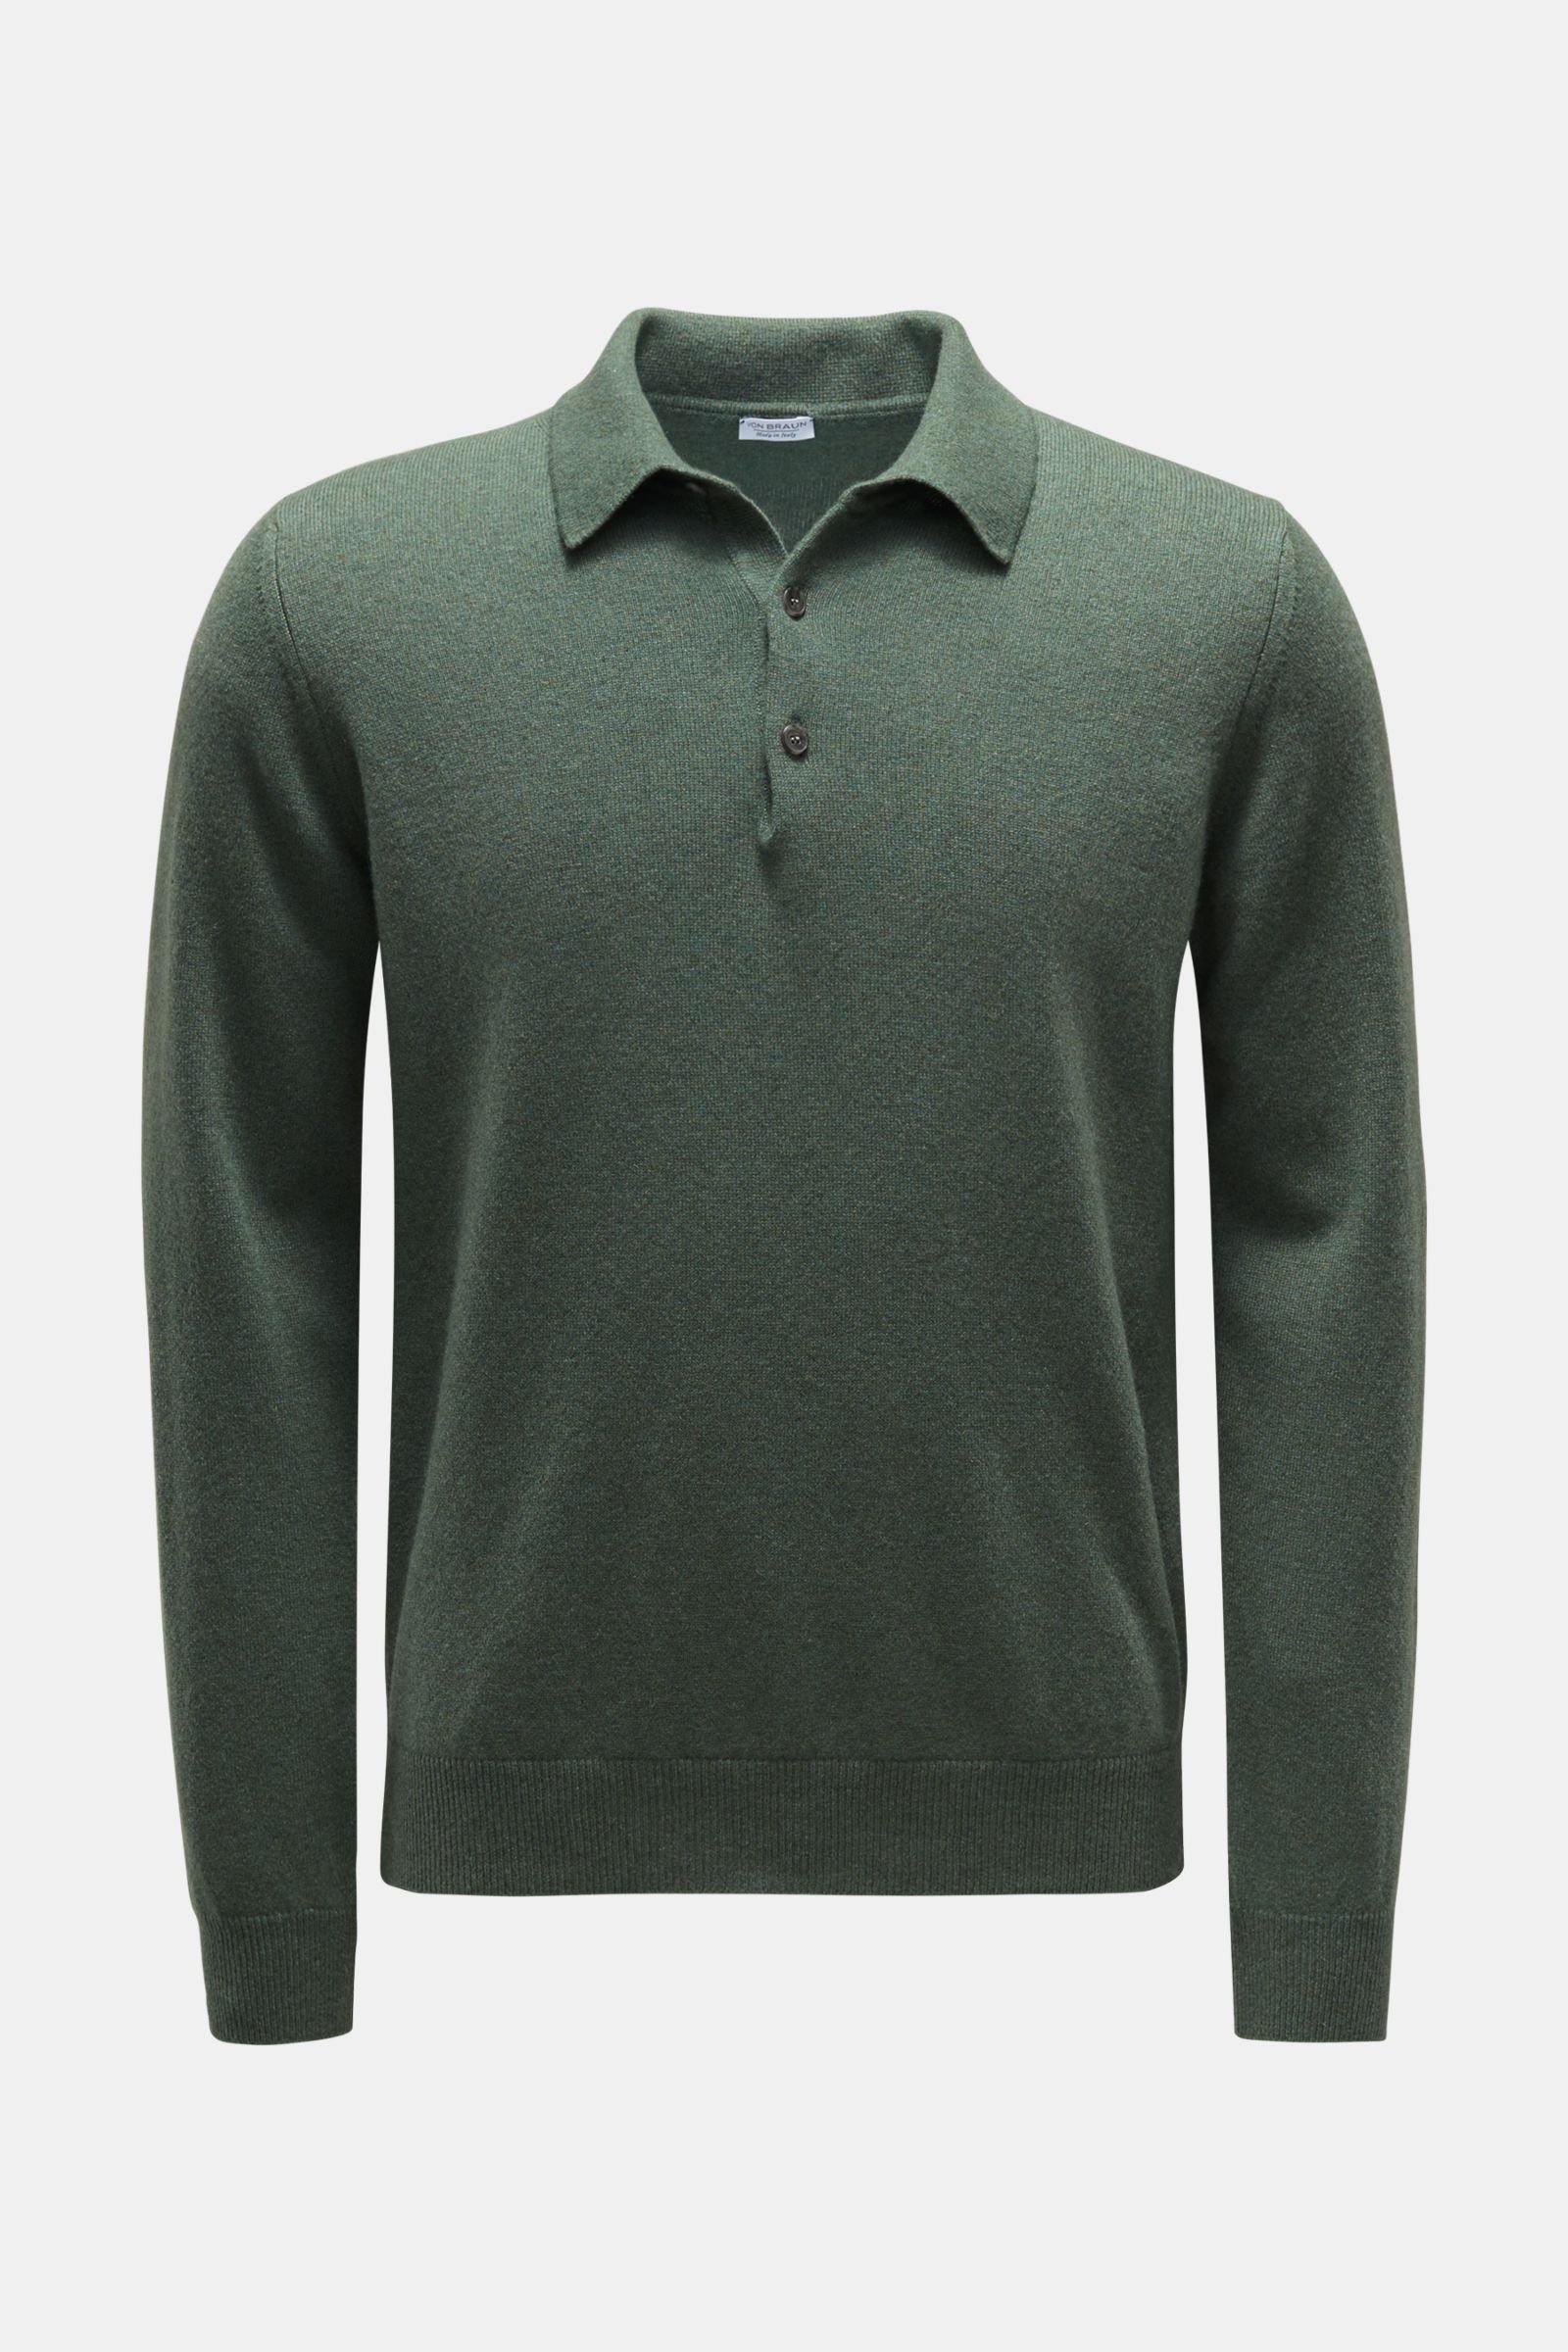 Cashmere knit polo grey-green